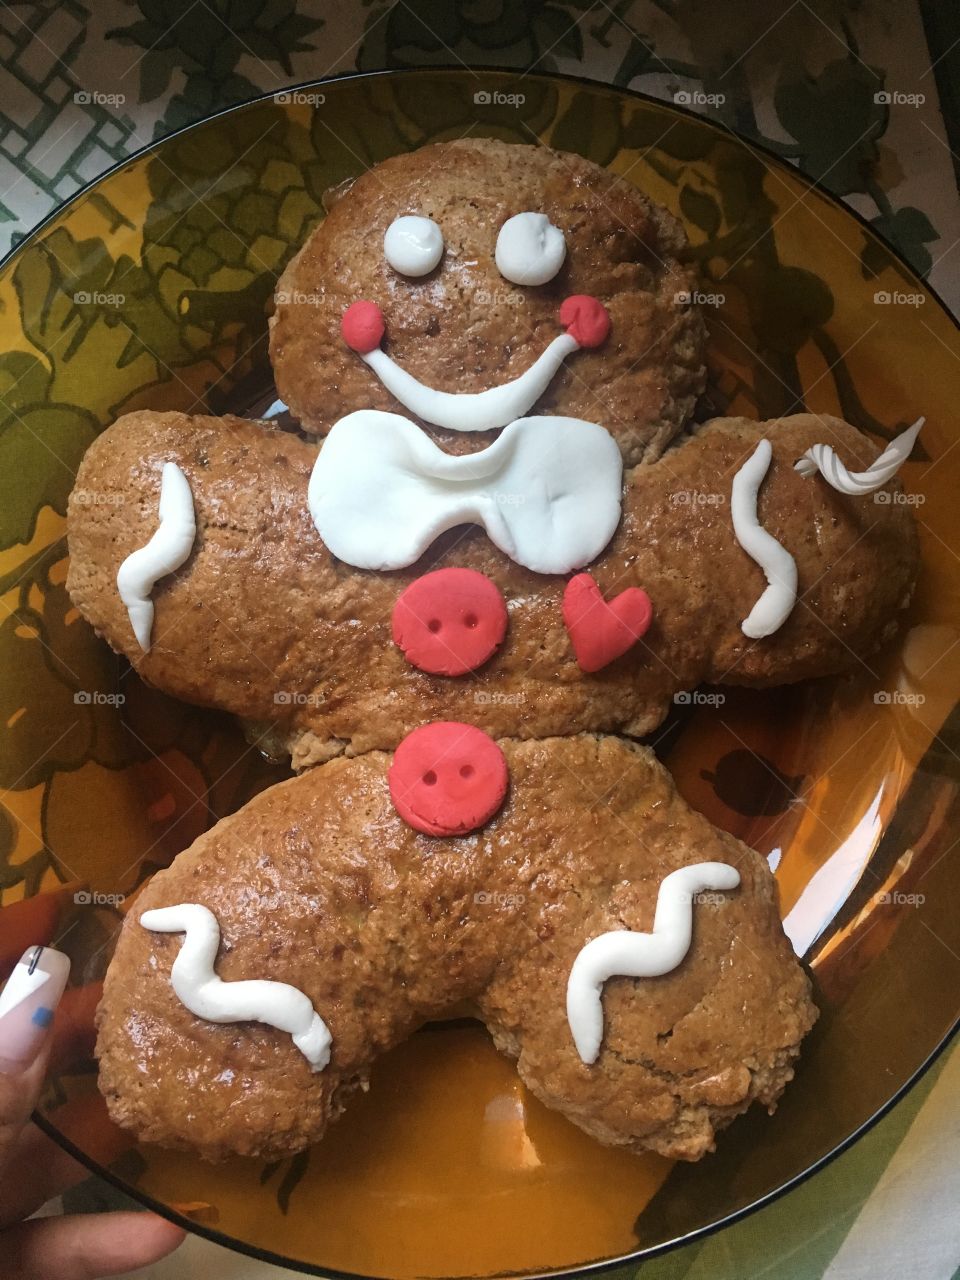 Baking is one of my secret rituals. A Gingerbread man cake with a touch of love from it fondant heart 